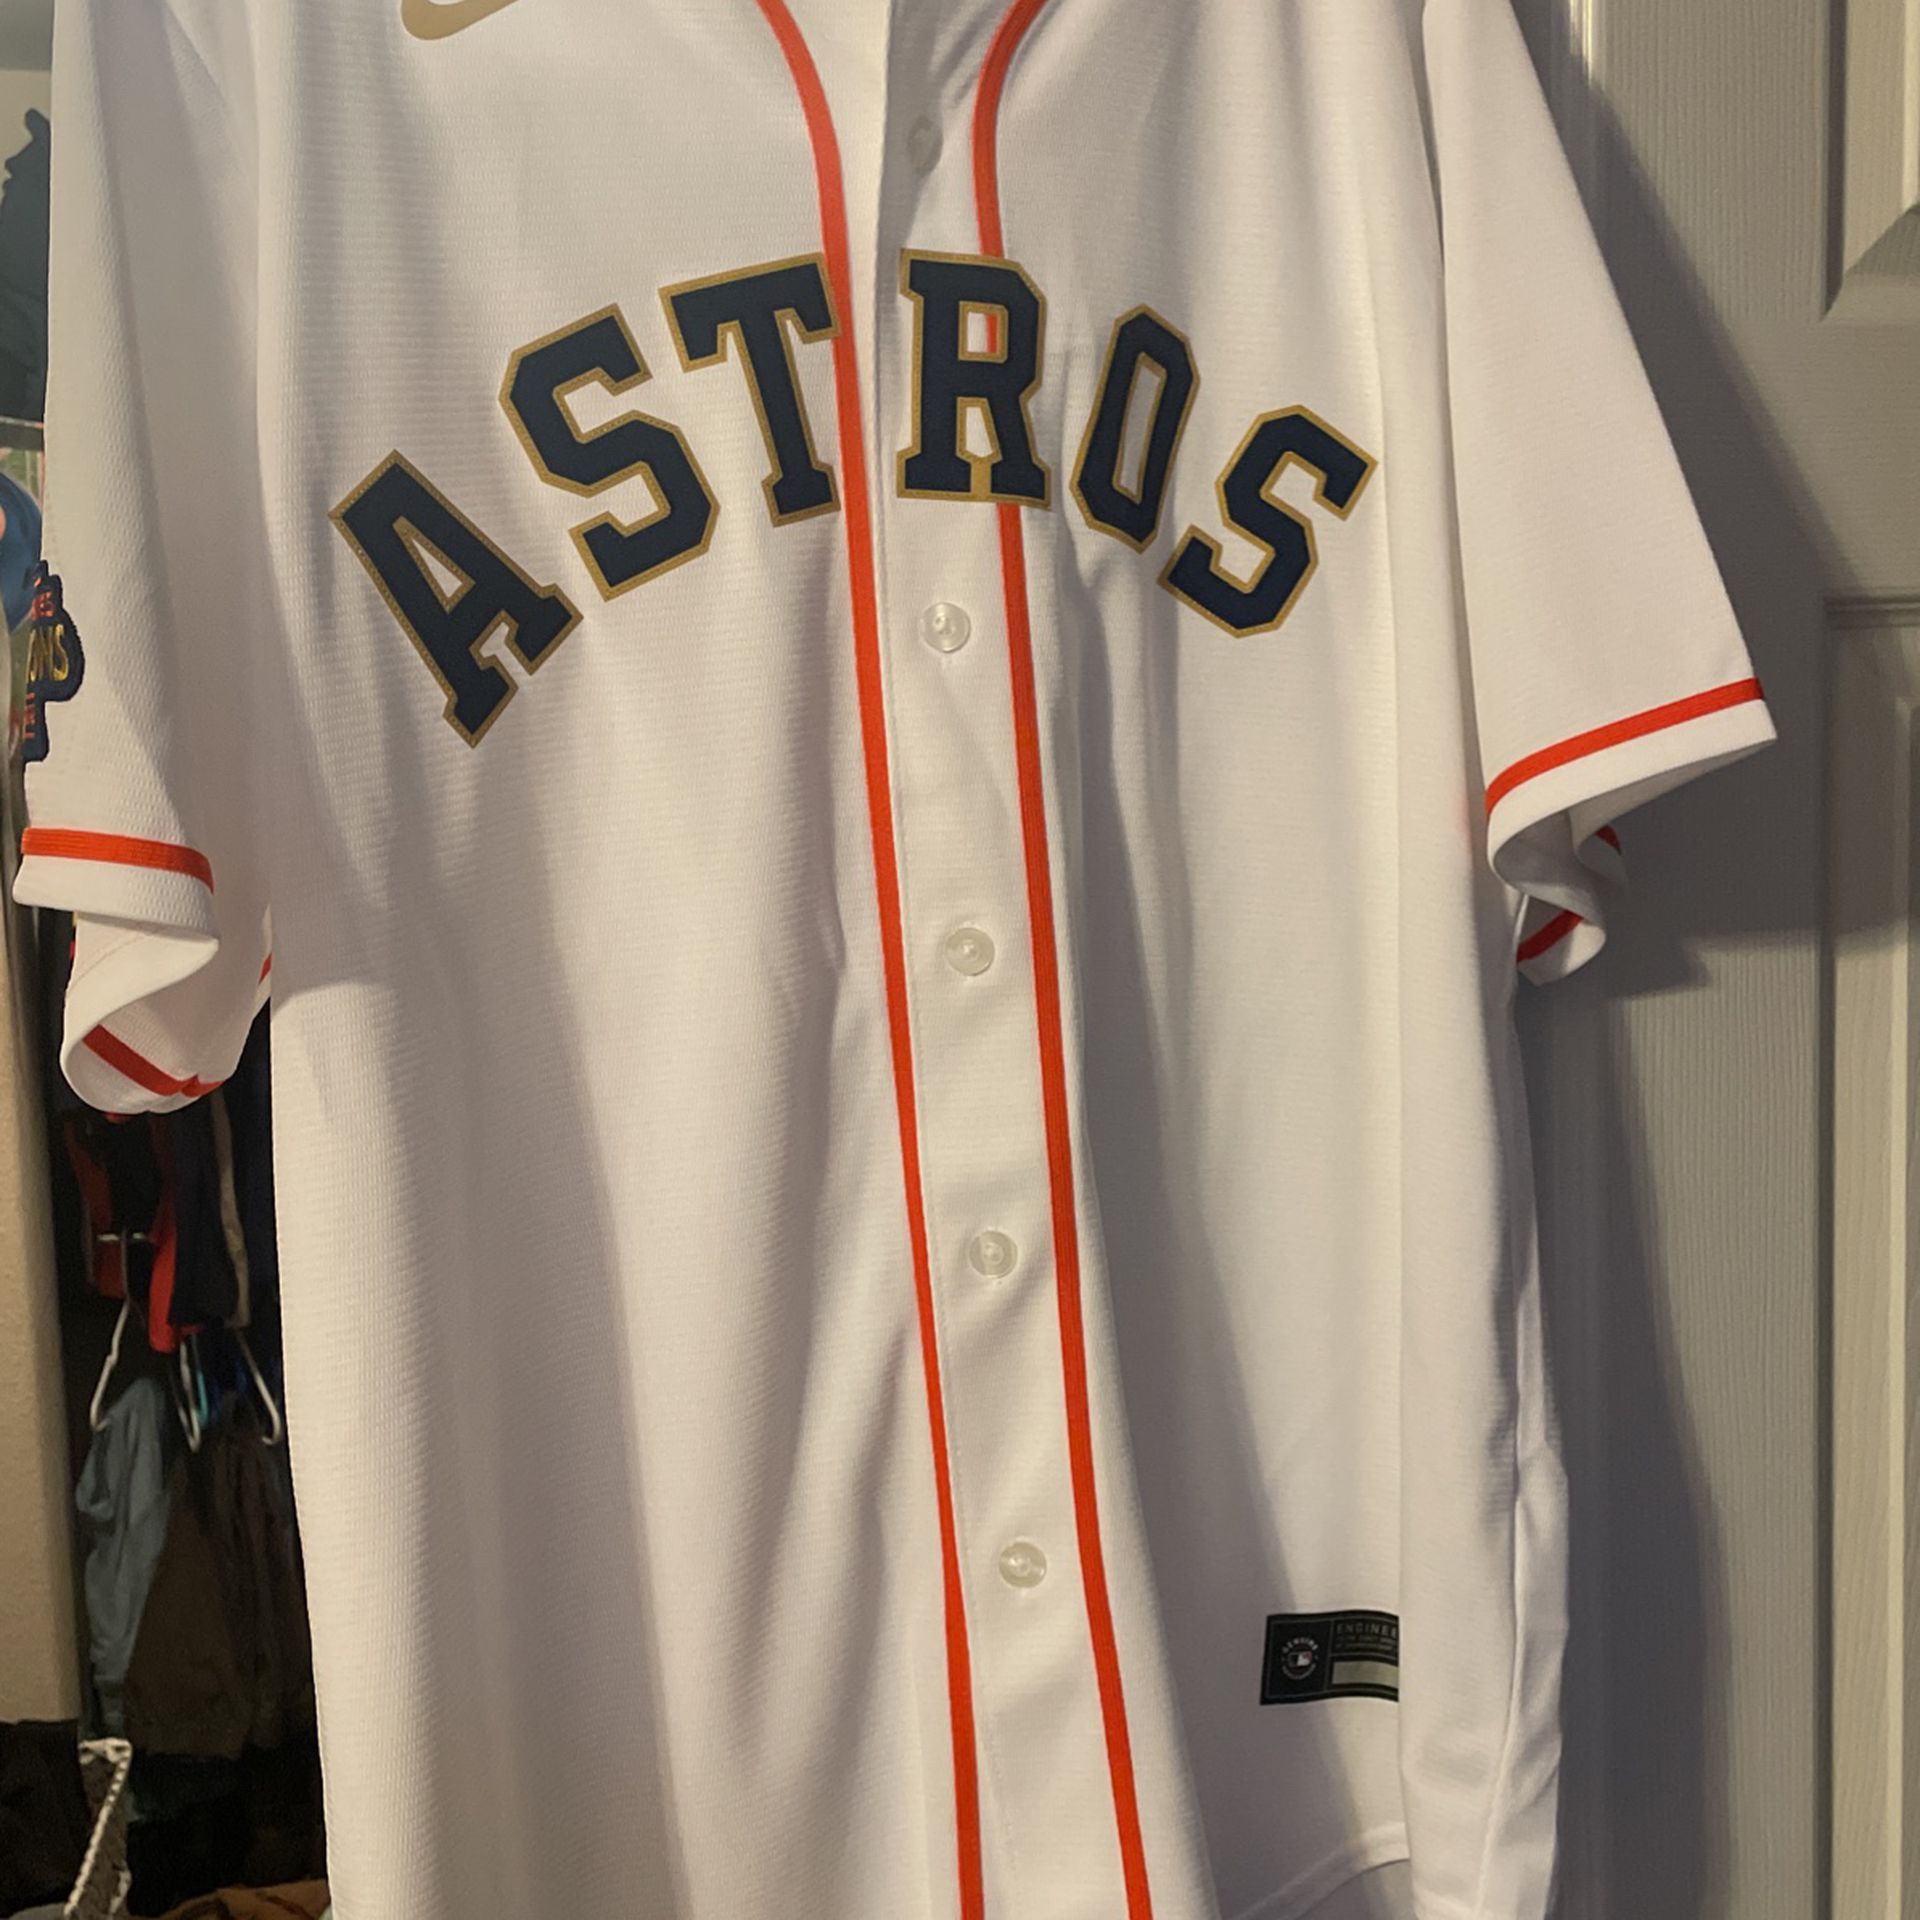 Astros Jersey, Altuve, Woman Astros Jersey, Youth Jersey, Altuve Jersey,  Houston Astros Jersey for Sale in Queens, NY - OfferUp